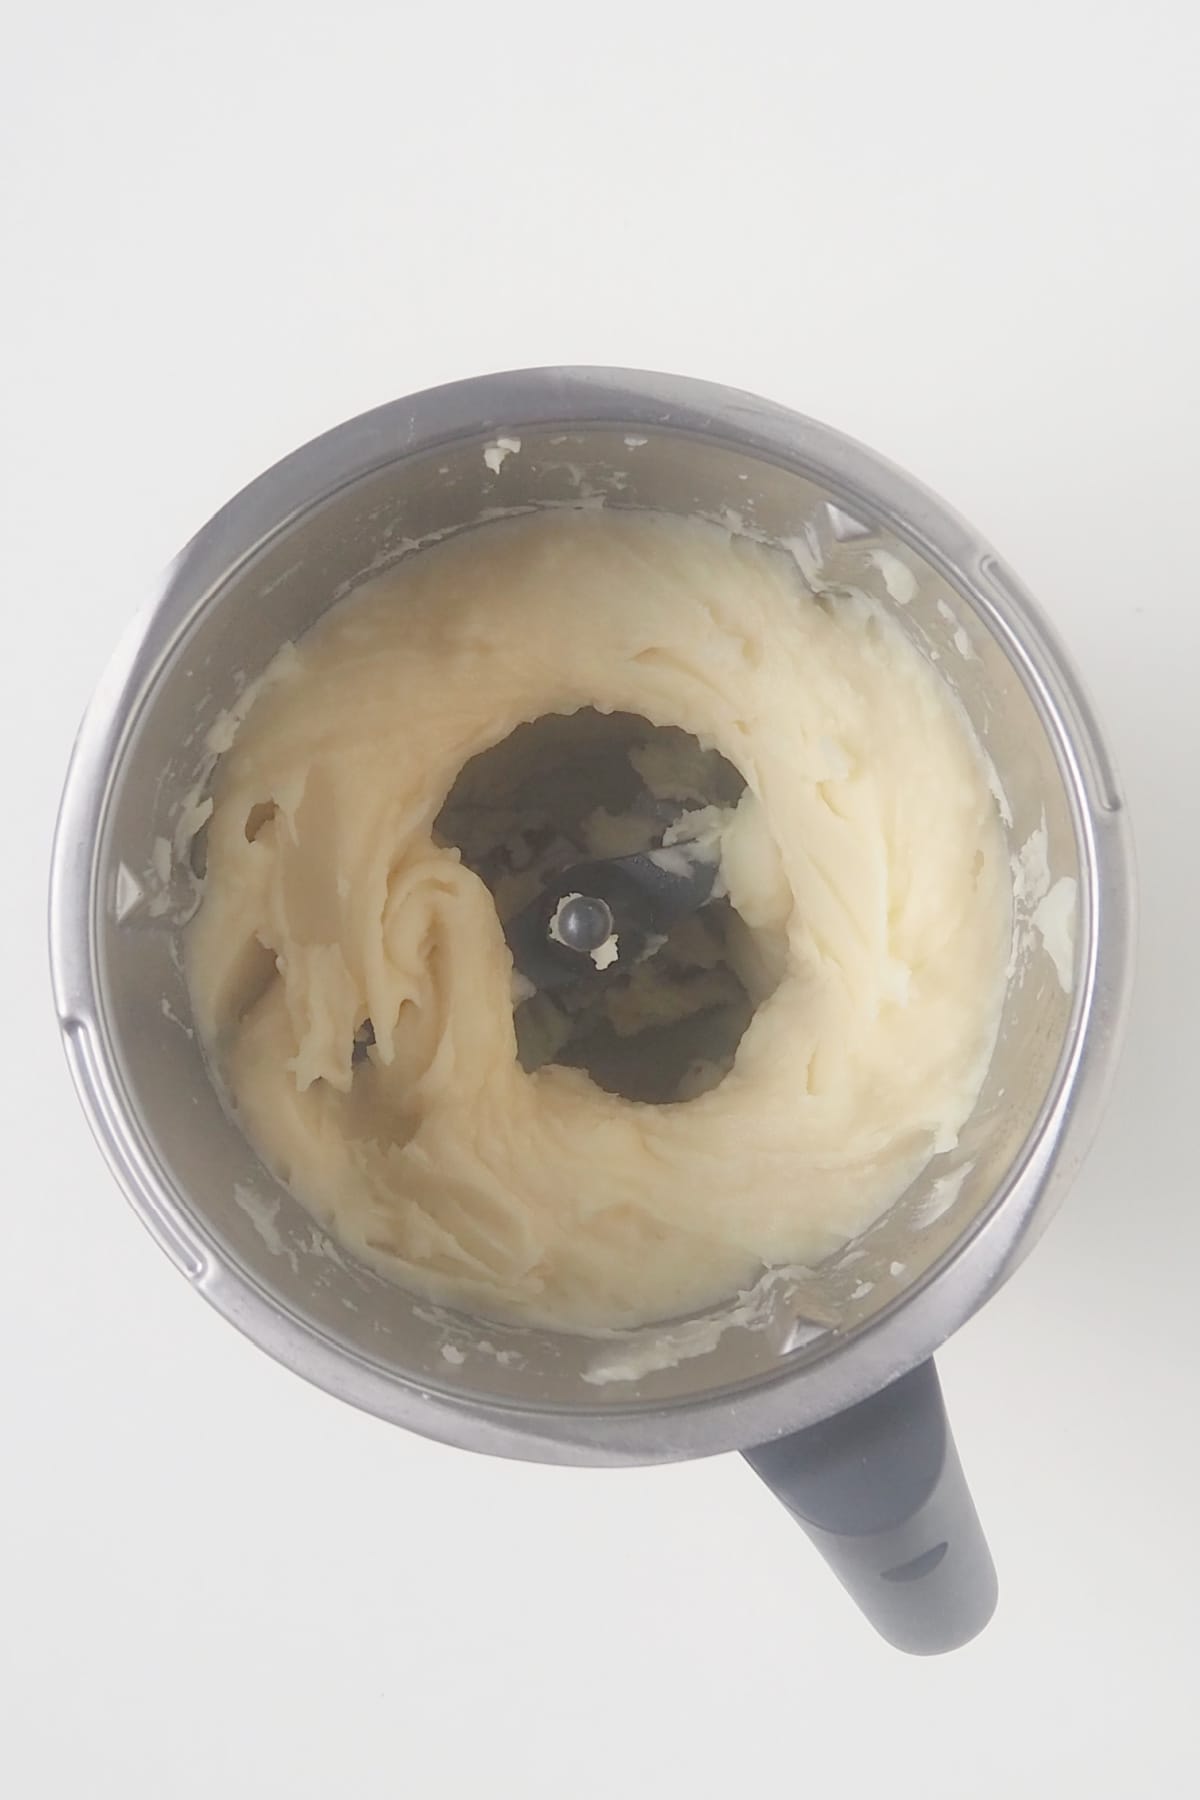 Mashed potato in a thermomix.